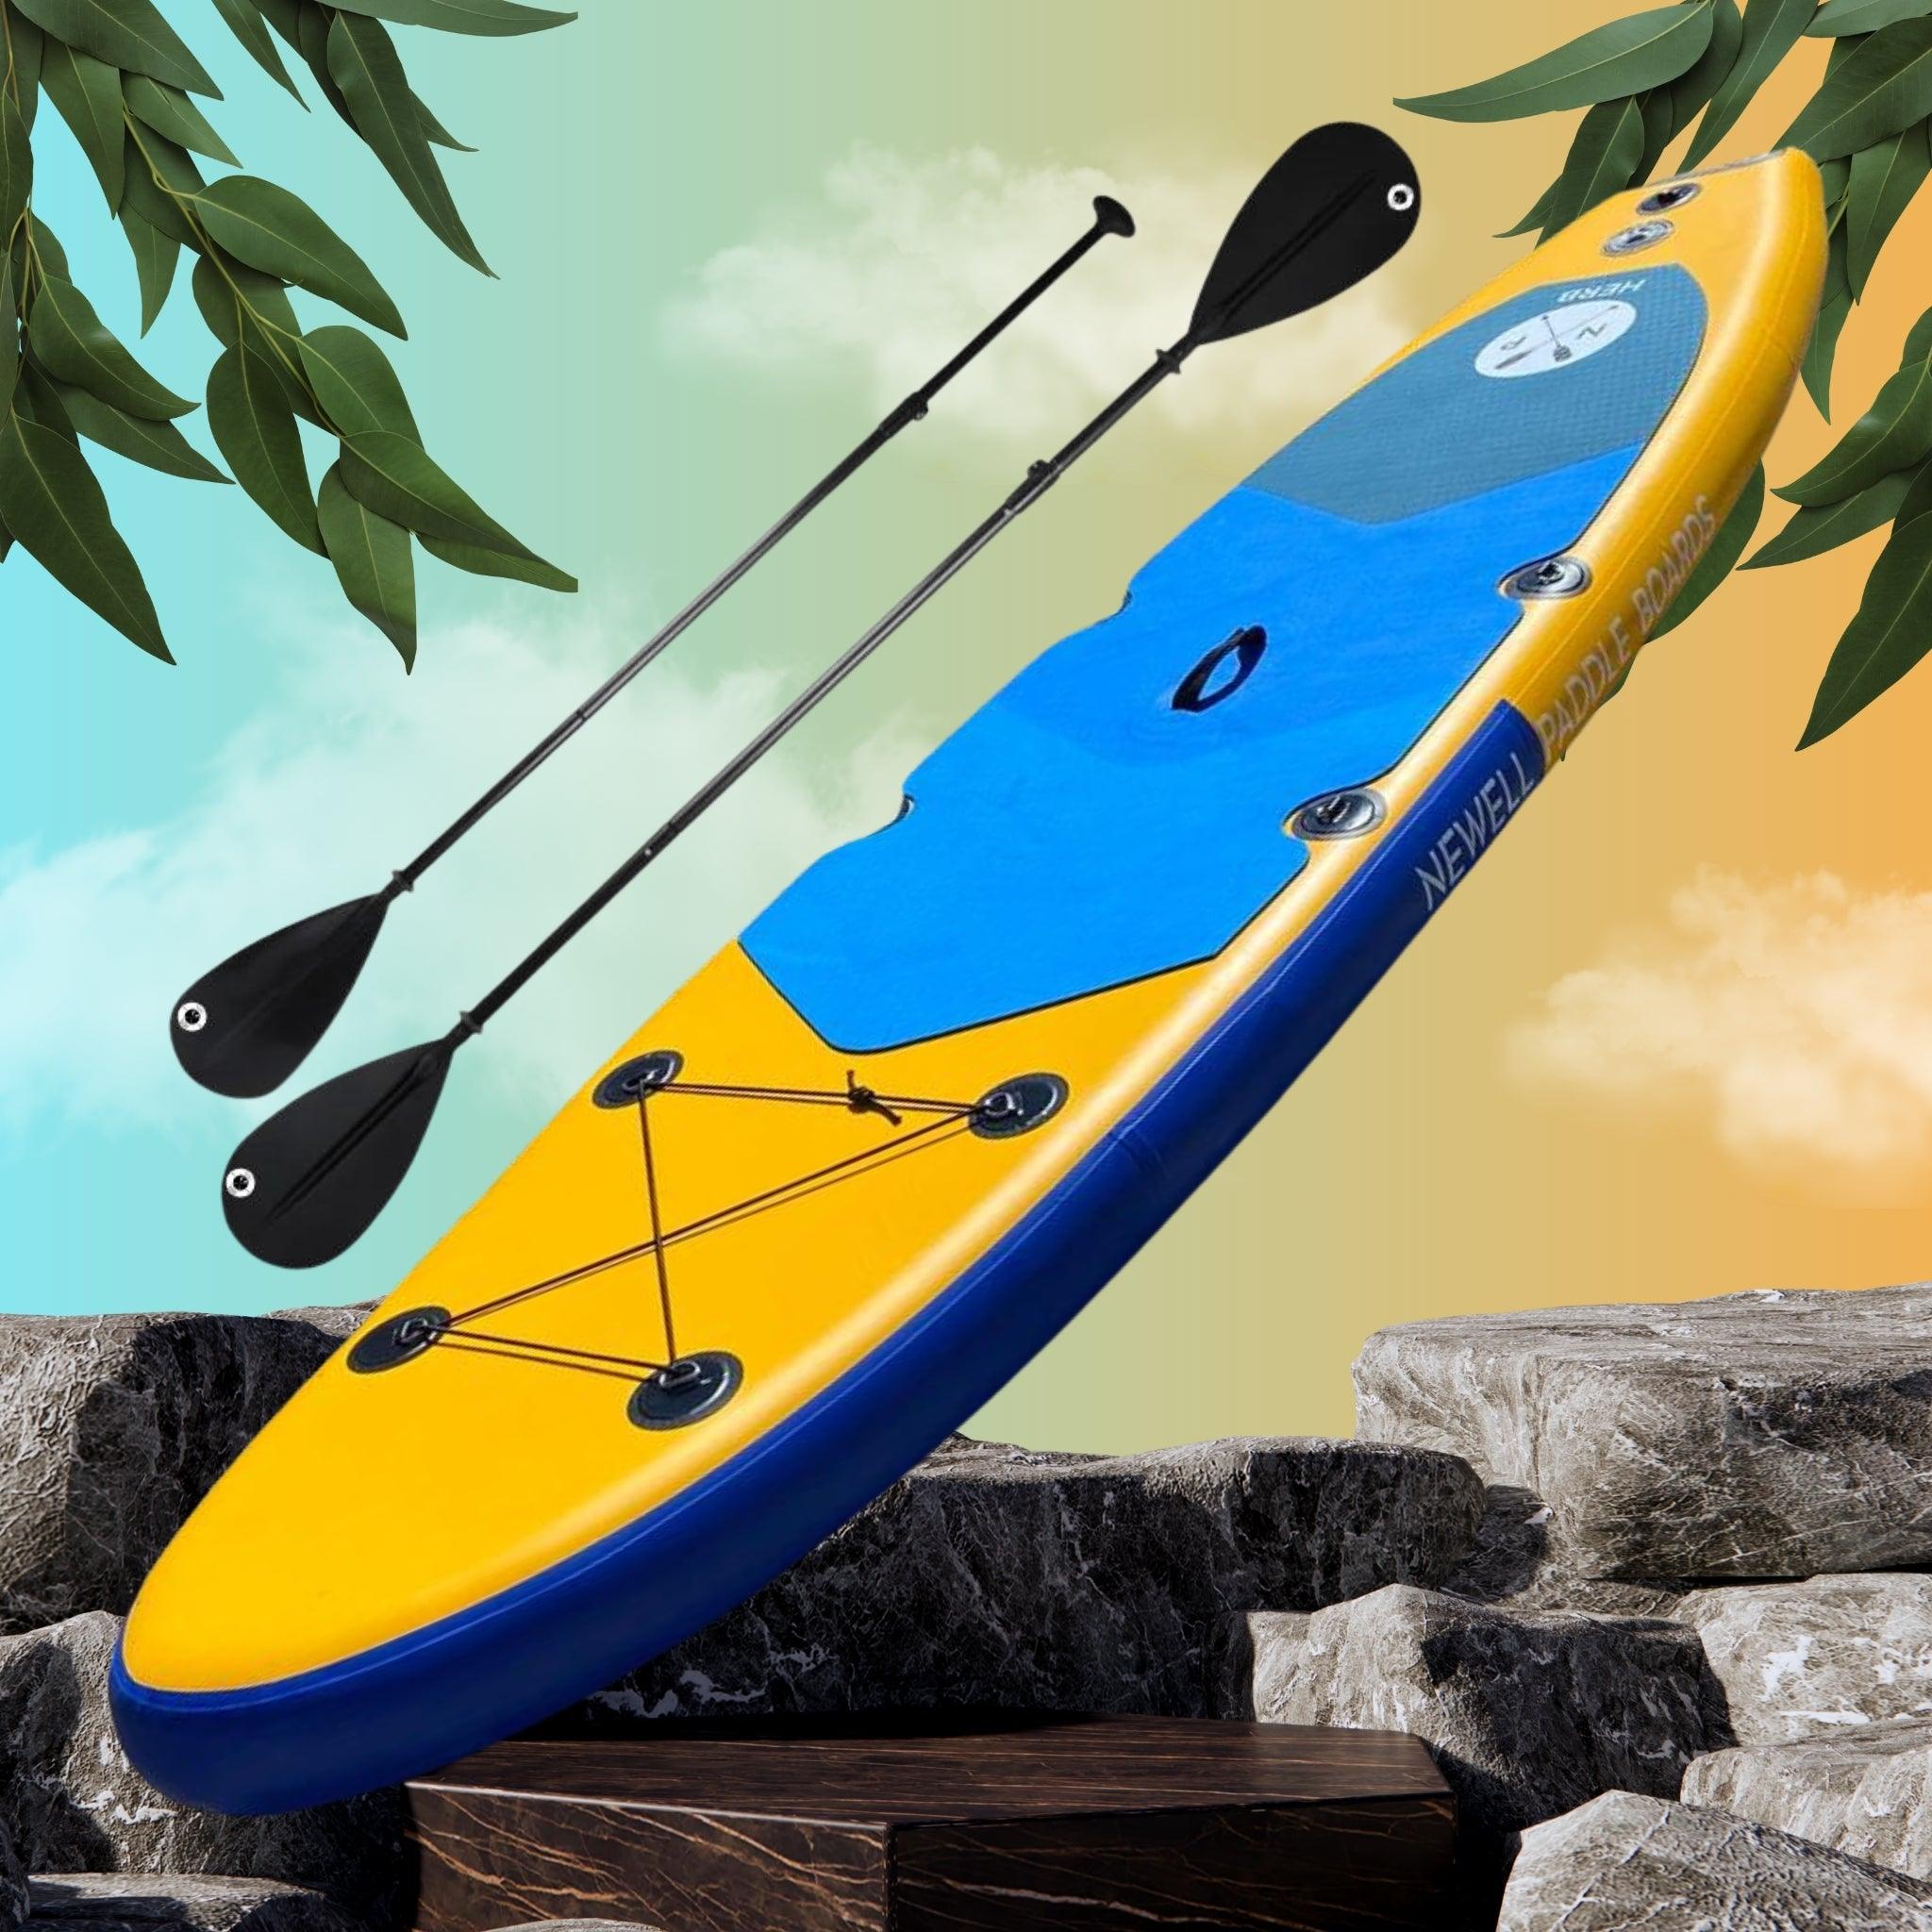 The Herb paddleboard against a colorful background.